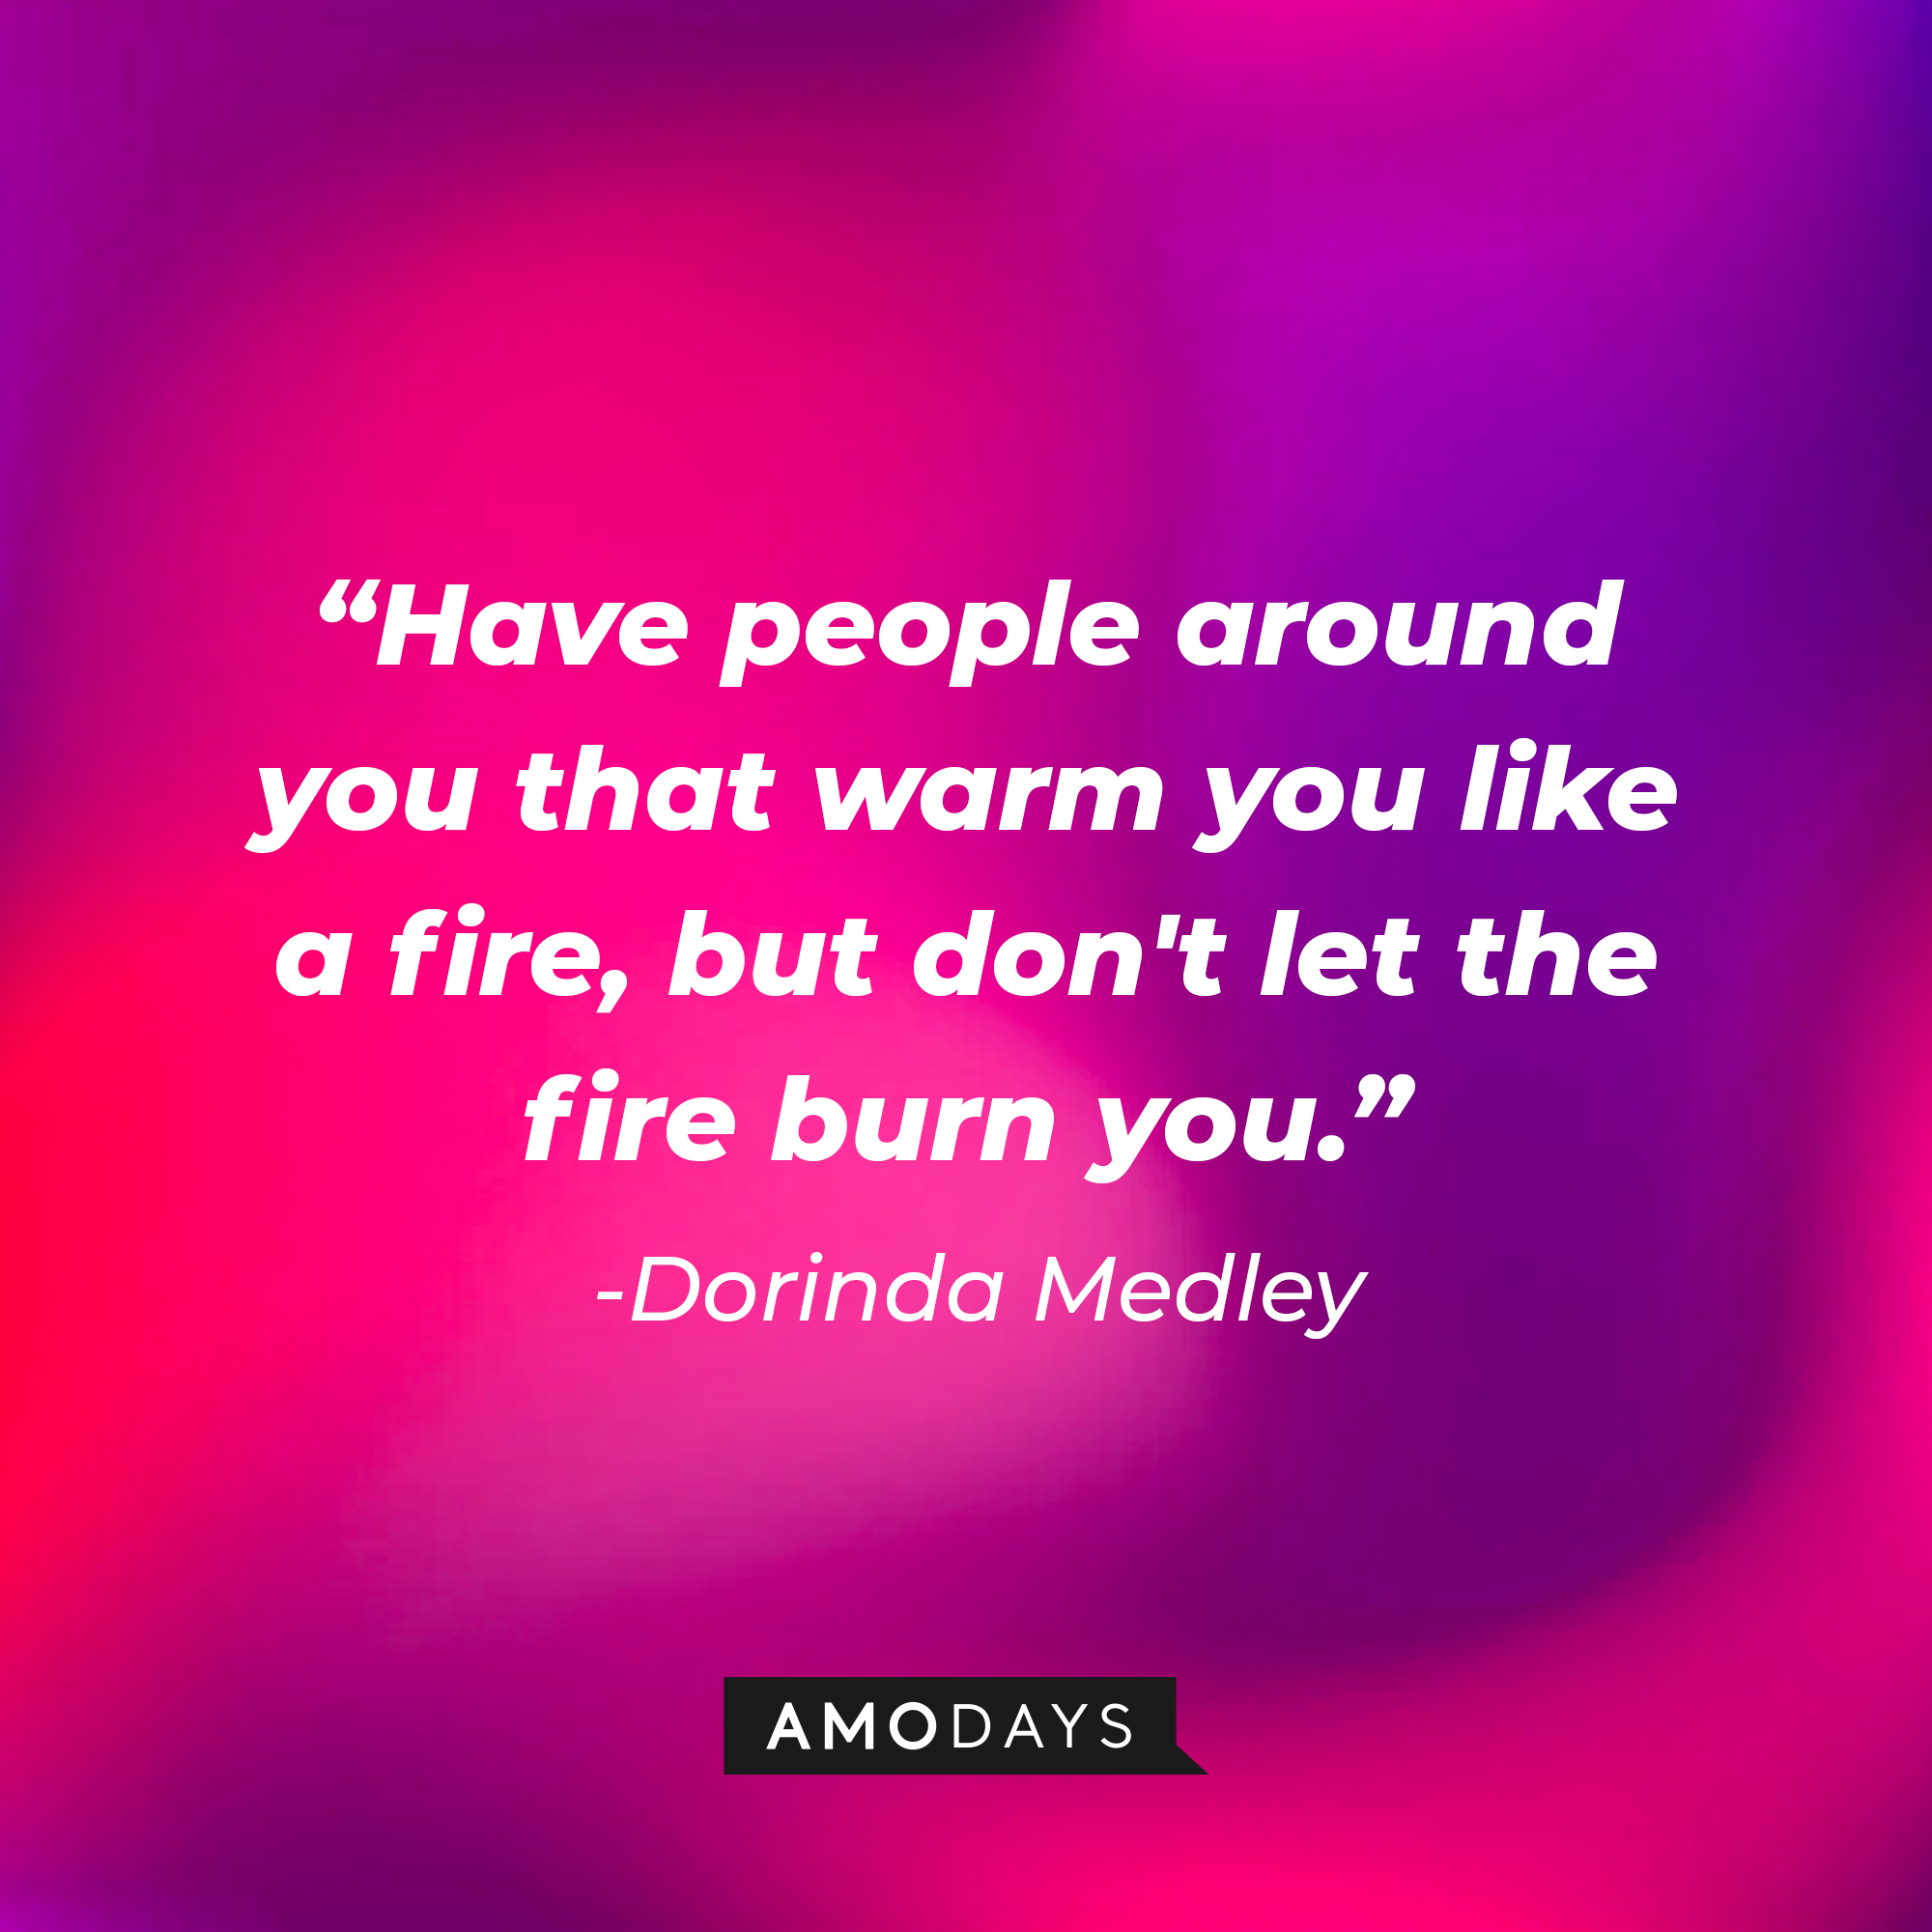 Dorinda Medley’s quote:"Have people around you that warm you like a fire, but don't let the fire burn you."  | Source: AmoDays